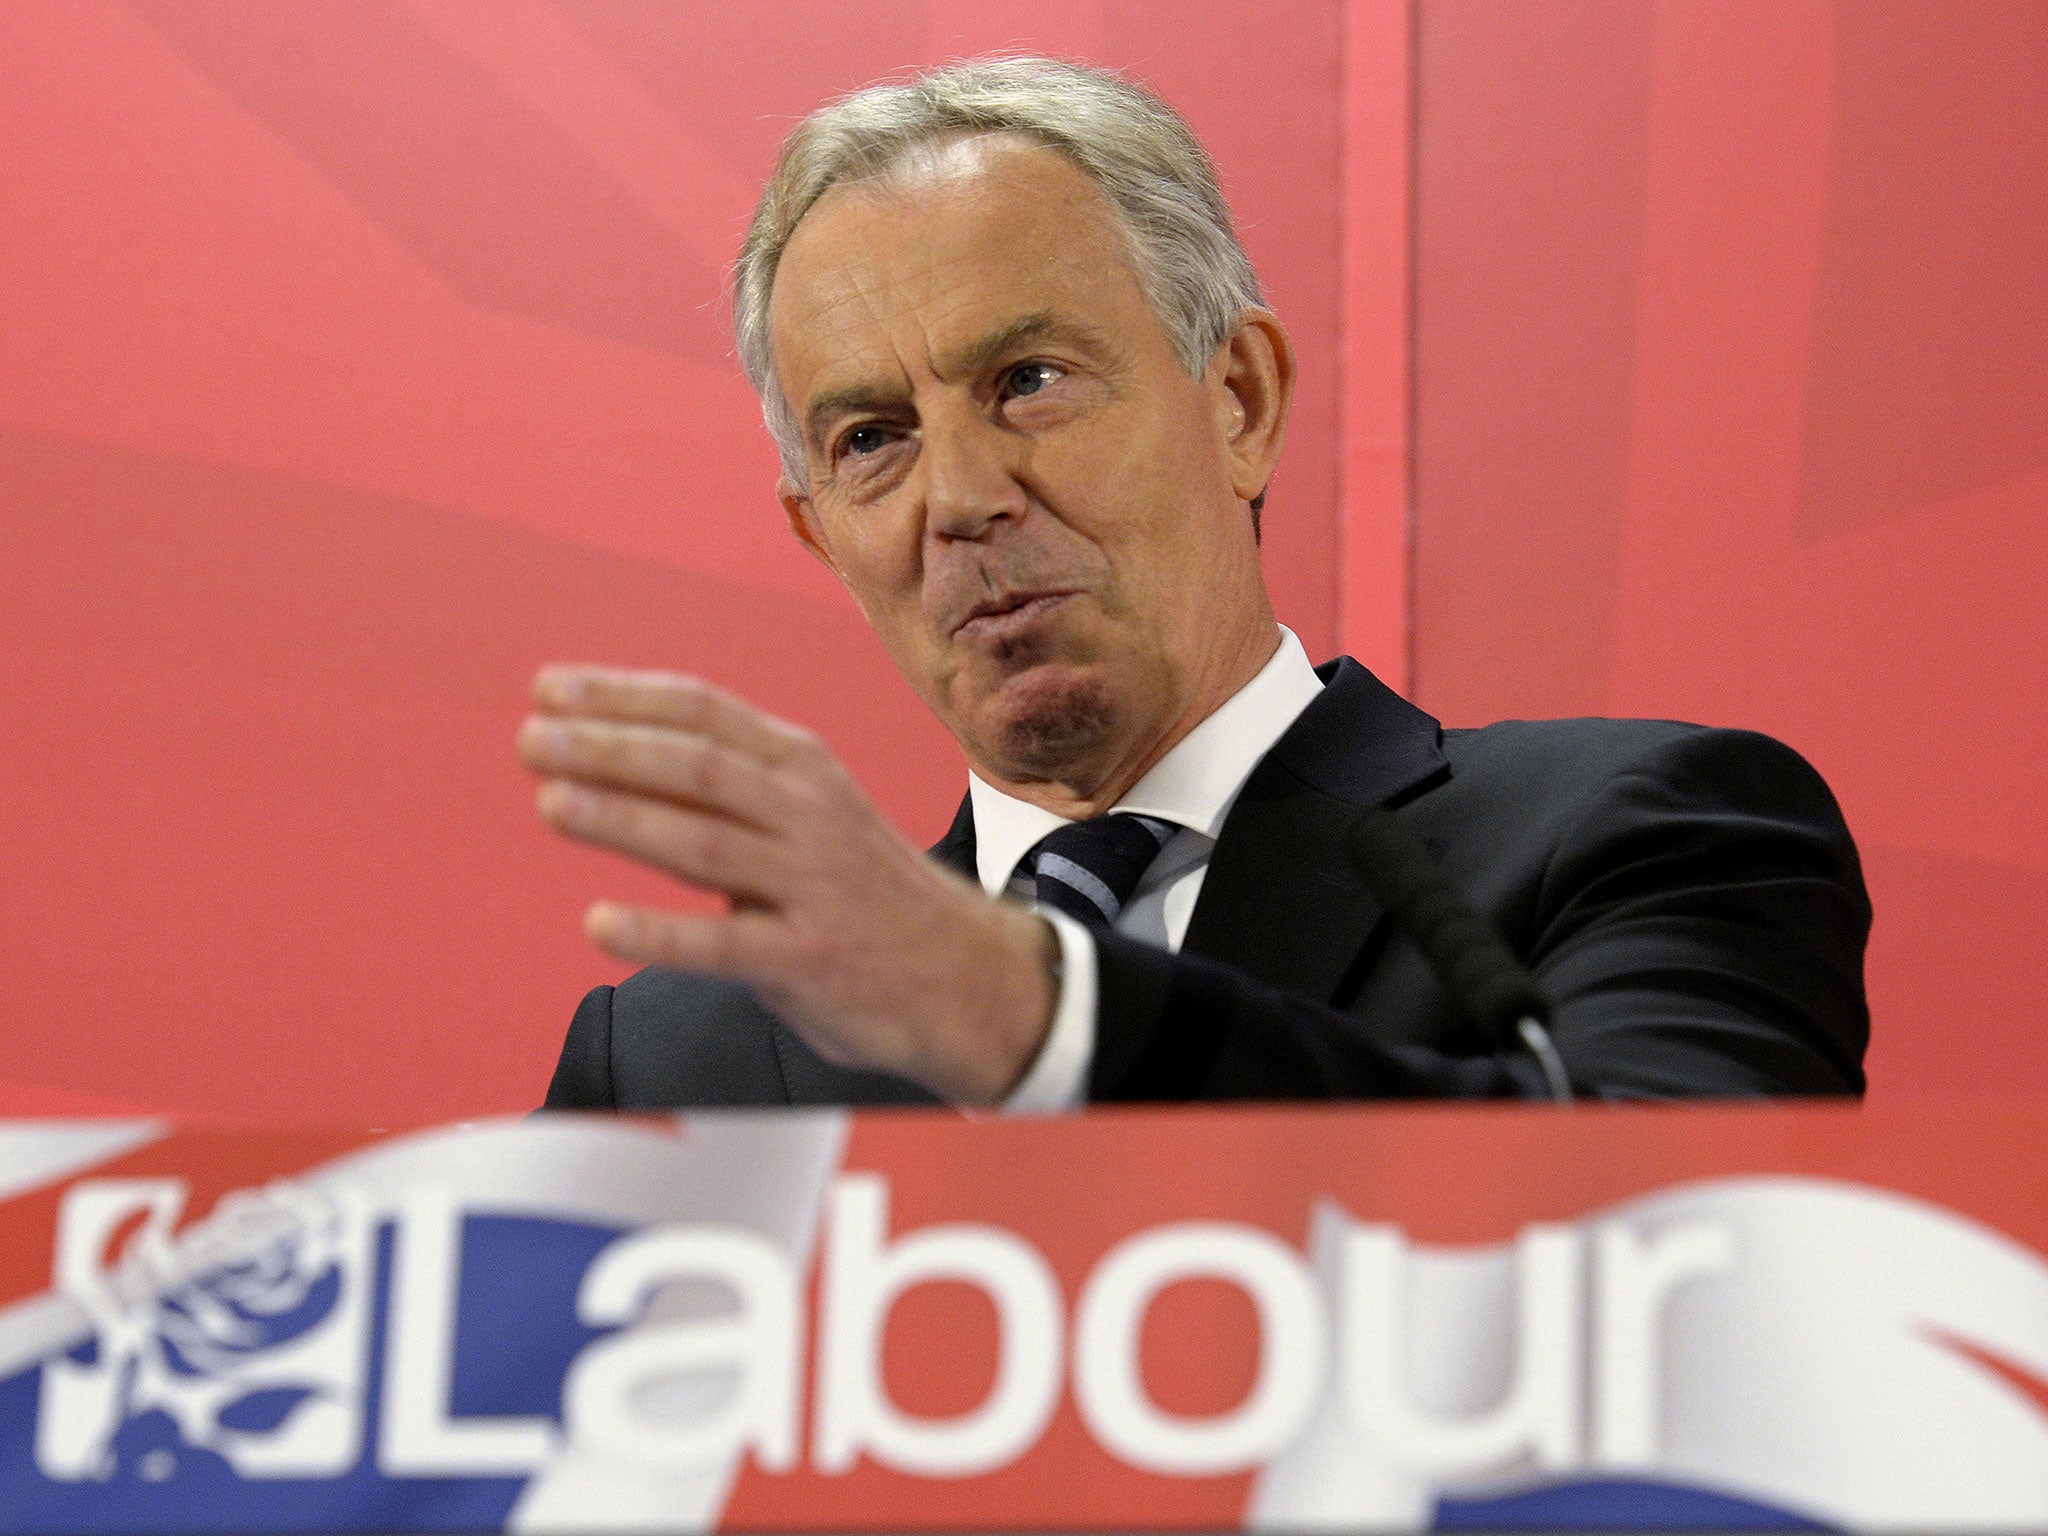 Former prime minister Tony Blair speaks during a visit to the Hitachi factory in his former constituency in Newton Aycliffe, County Durham, 7 April 2015